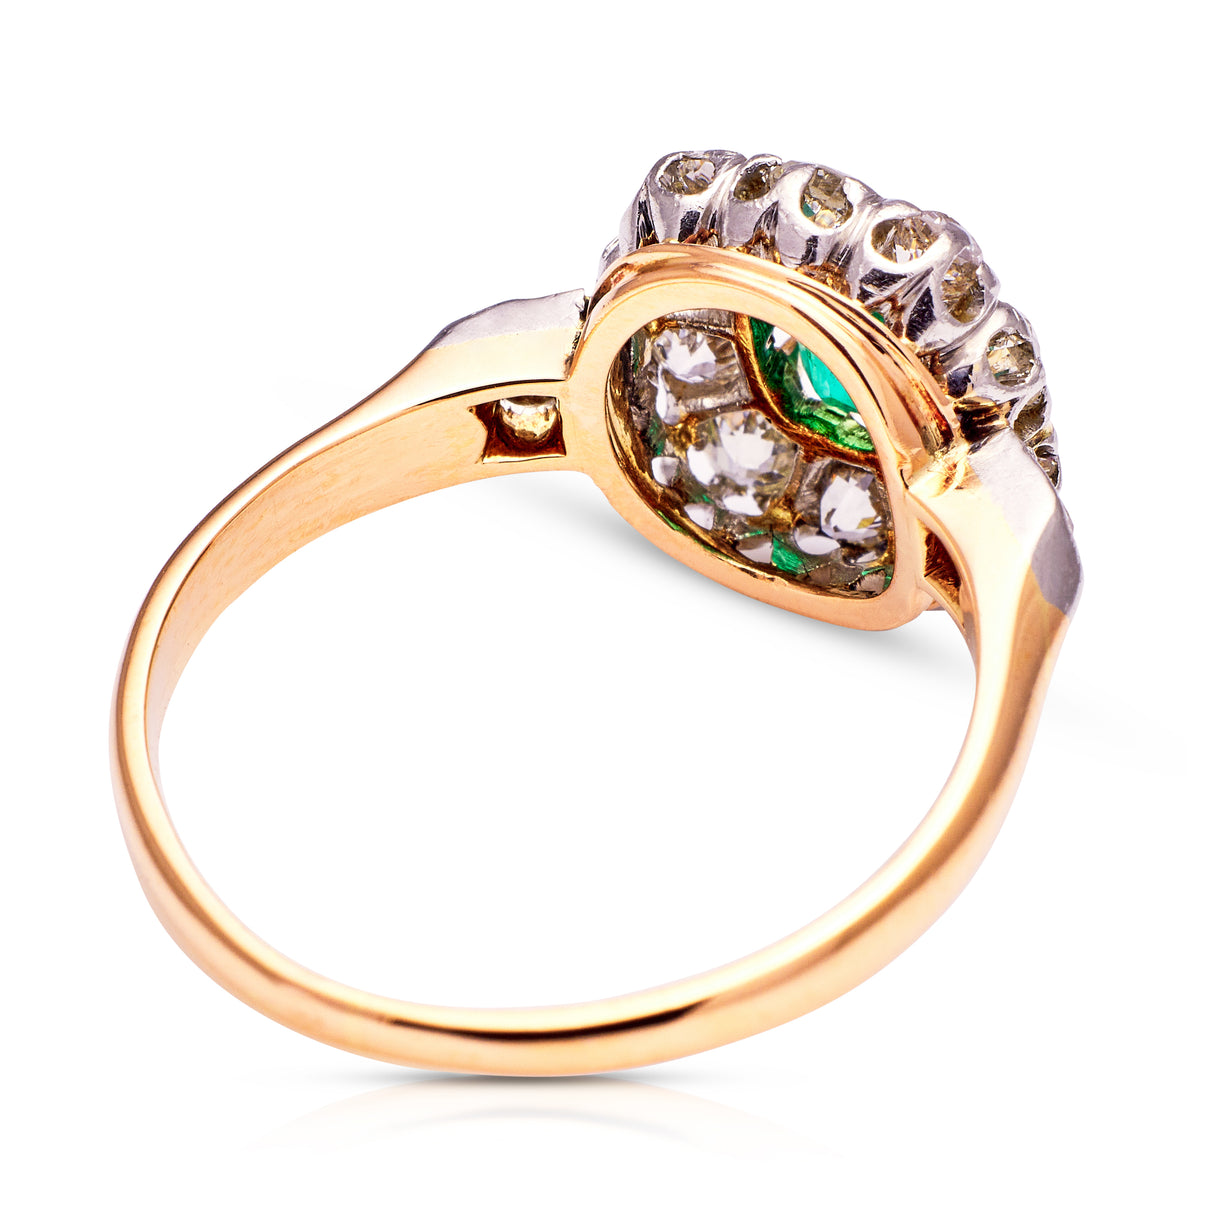 Antique emerald and diamond cluster ring, rear view.